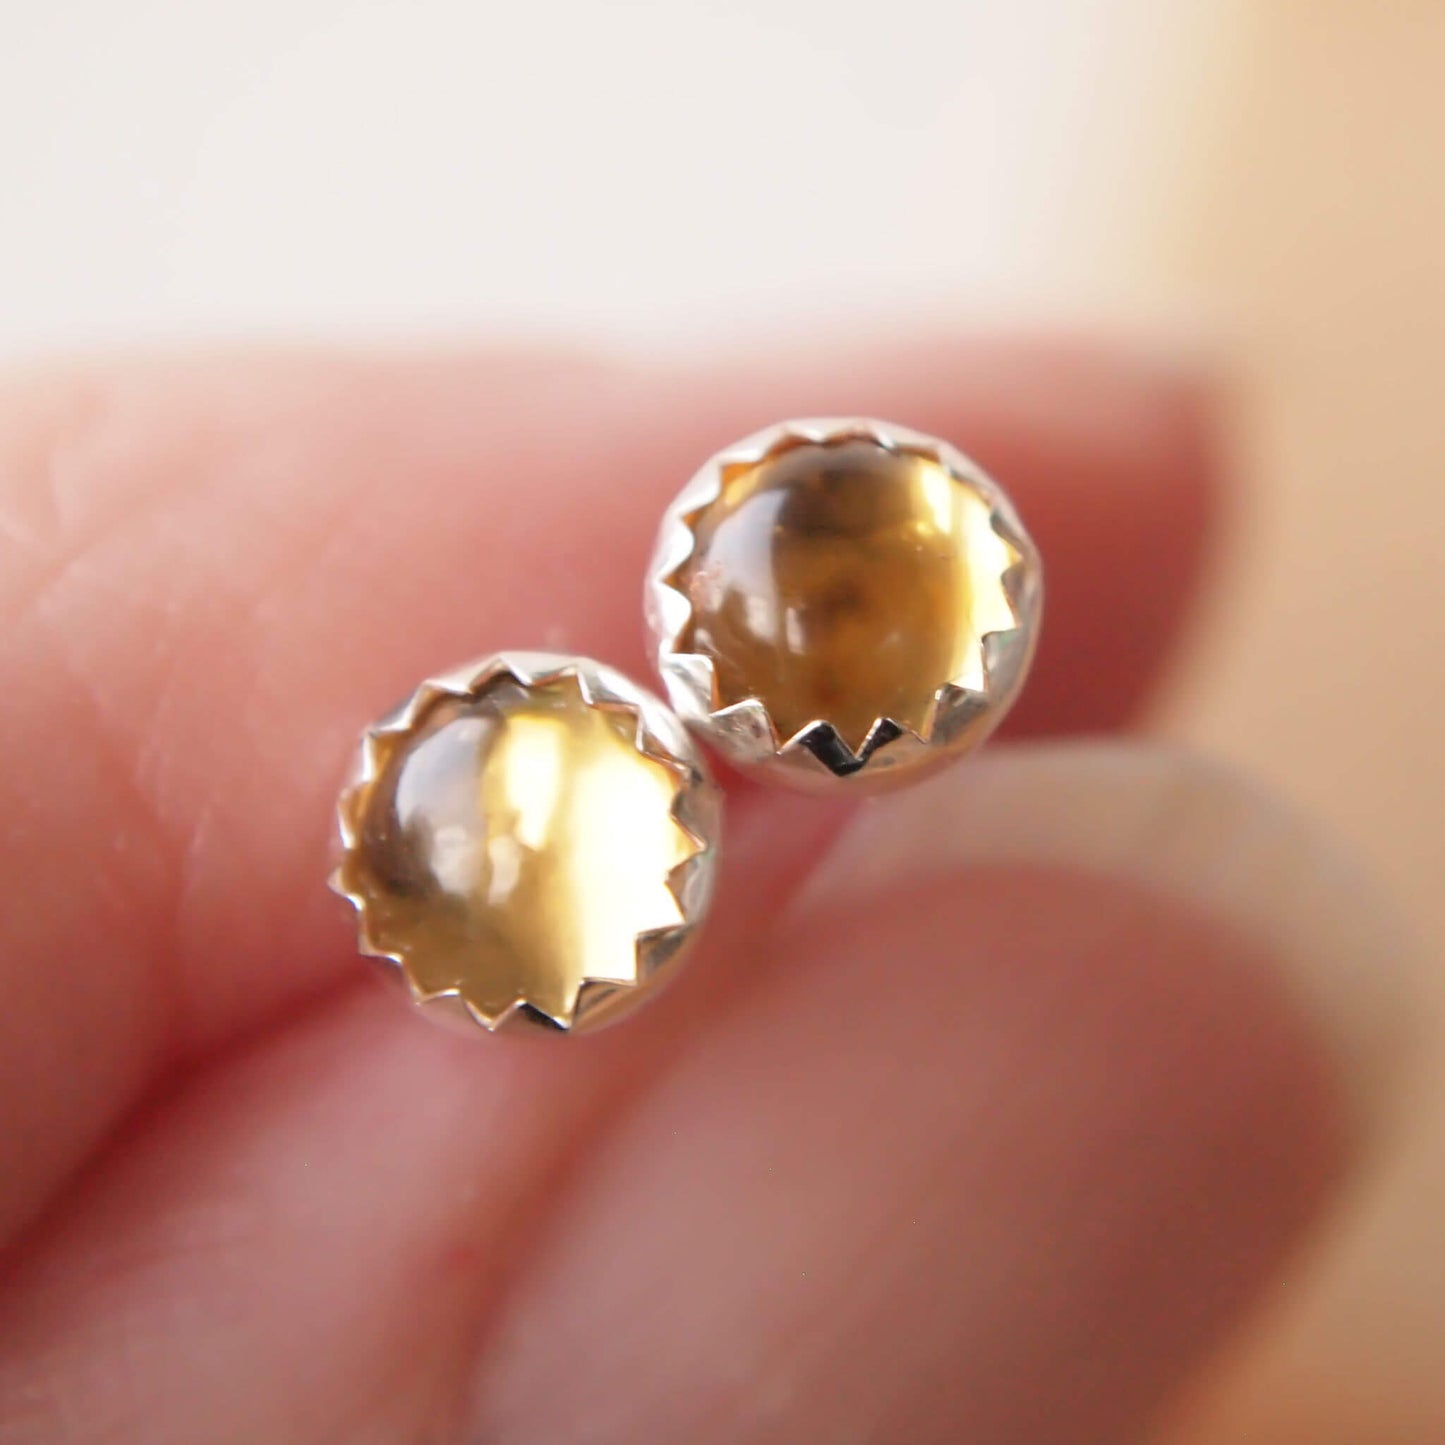 November Birthstone Silver Stud earrings made from a pair of round yellow citrines set simply in Sterling Silver. Minimalist Sterling SIlver handmade by maram jewellery in UK